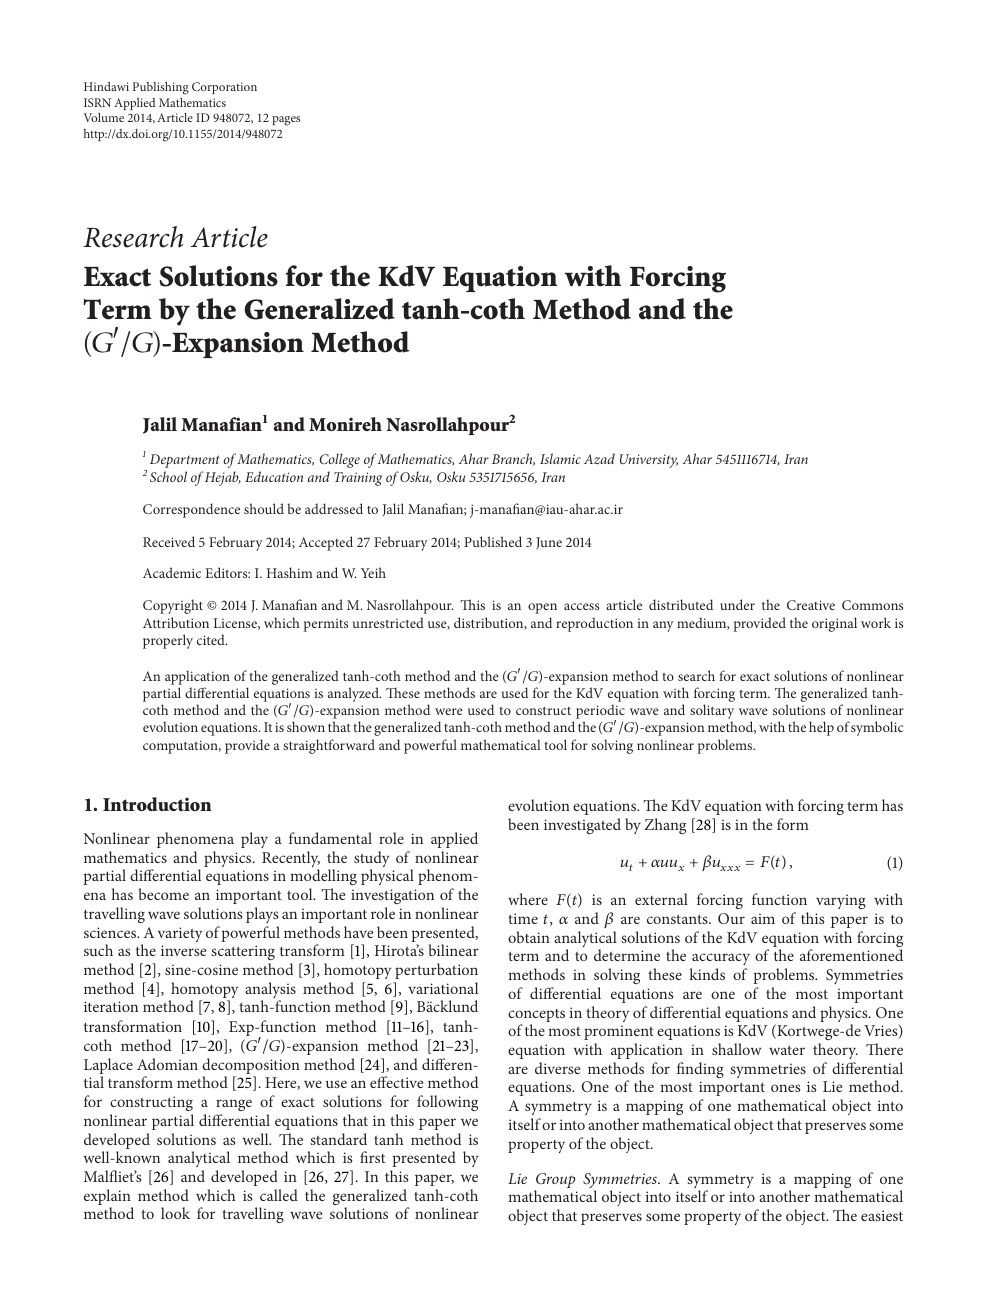 Exact Solutions For The Kdv Equation With Forcing Term By The Generalized Tanh Coth Method And The G G Expansion Method Topic Of Research Paper In Mathematics Download